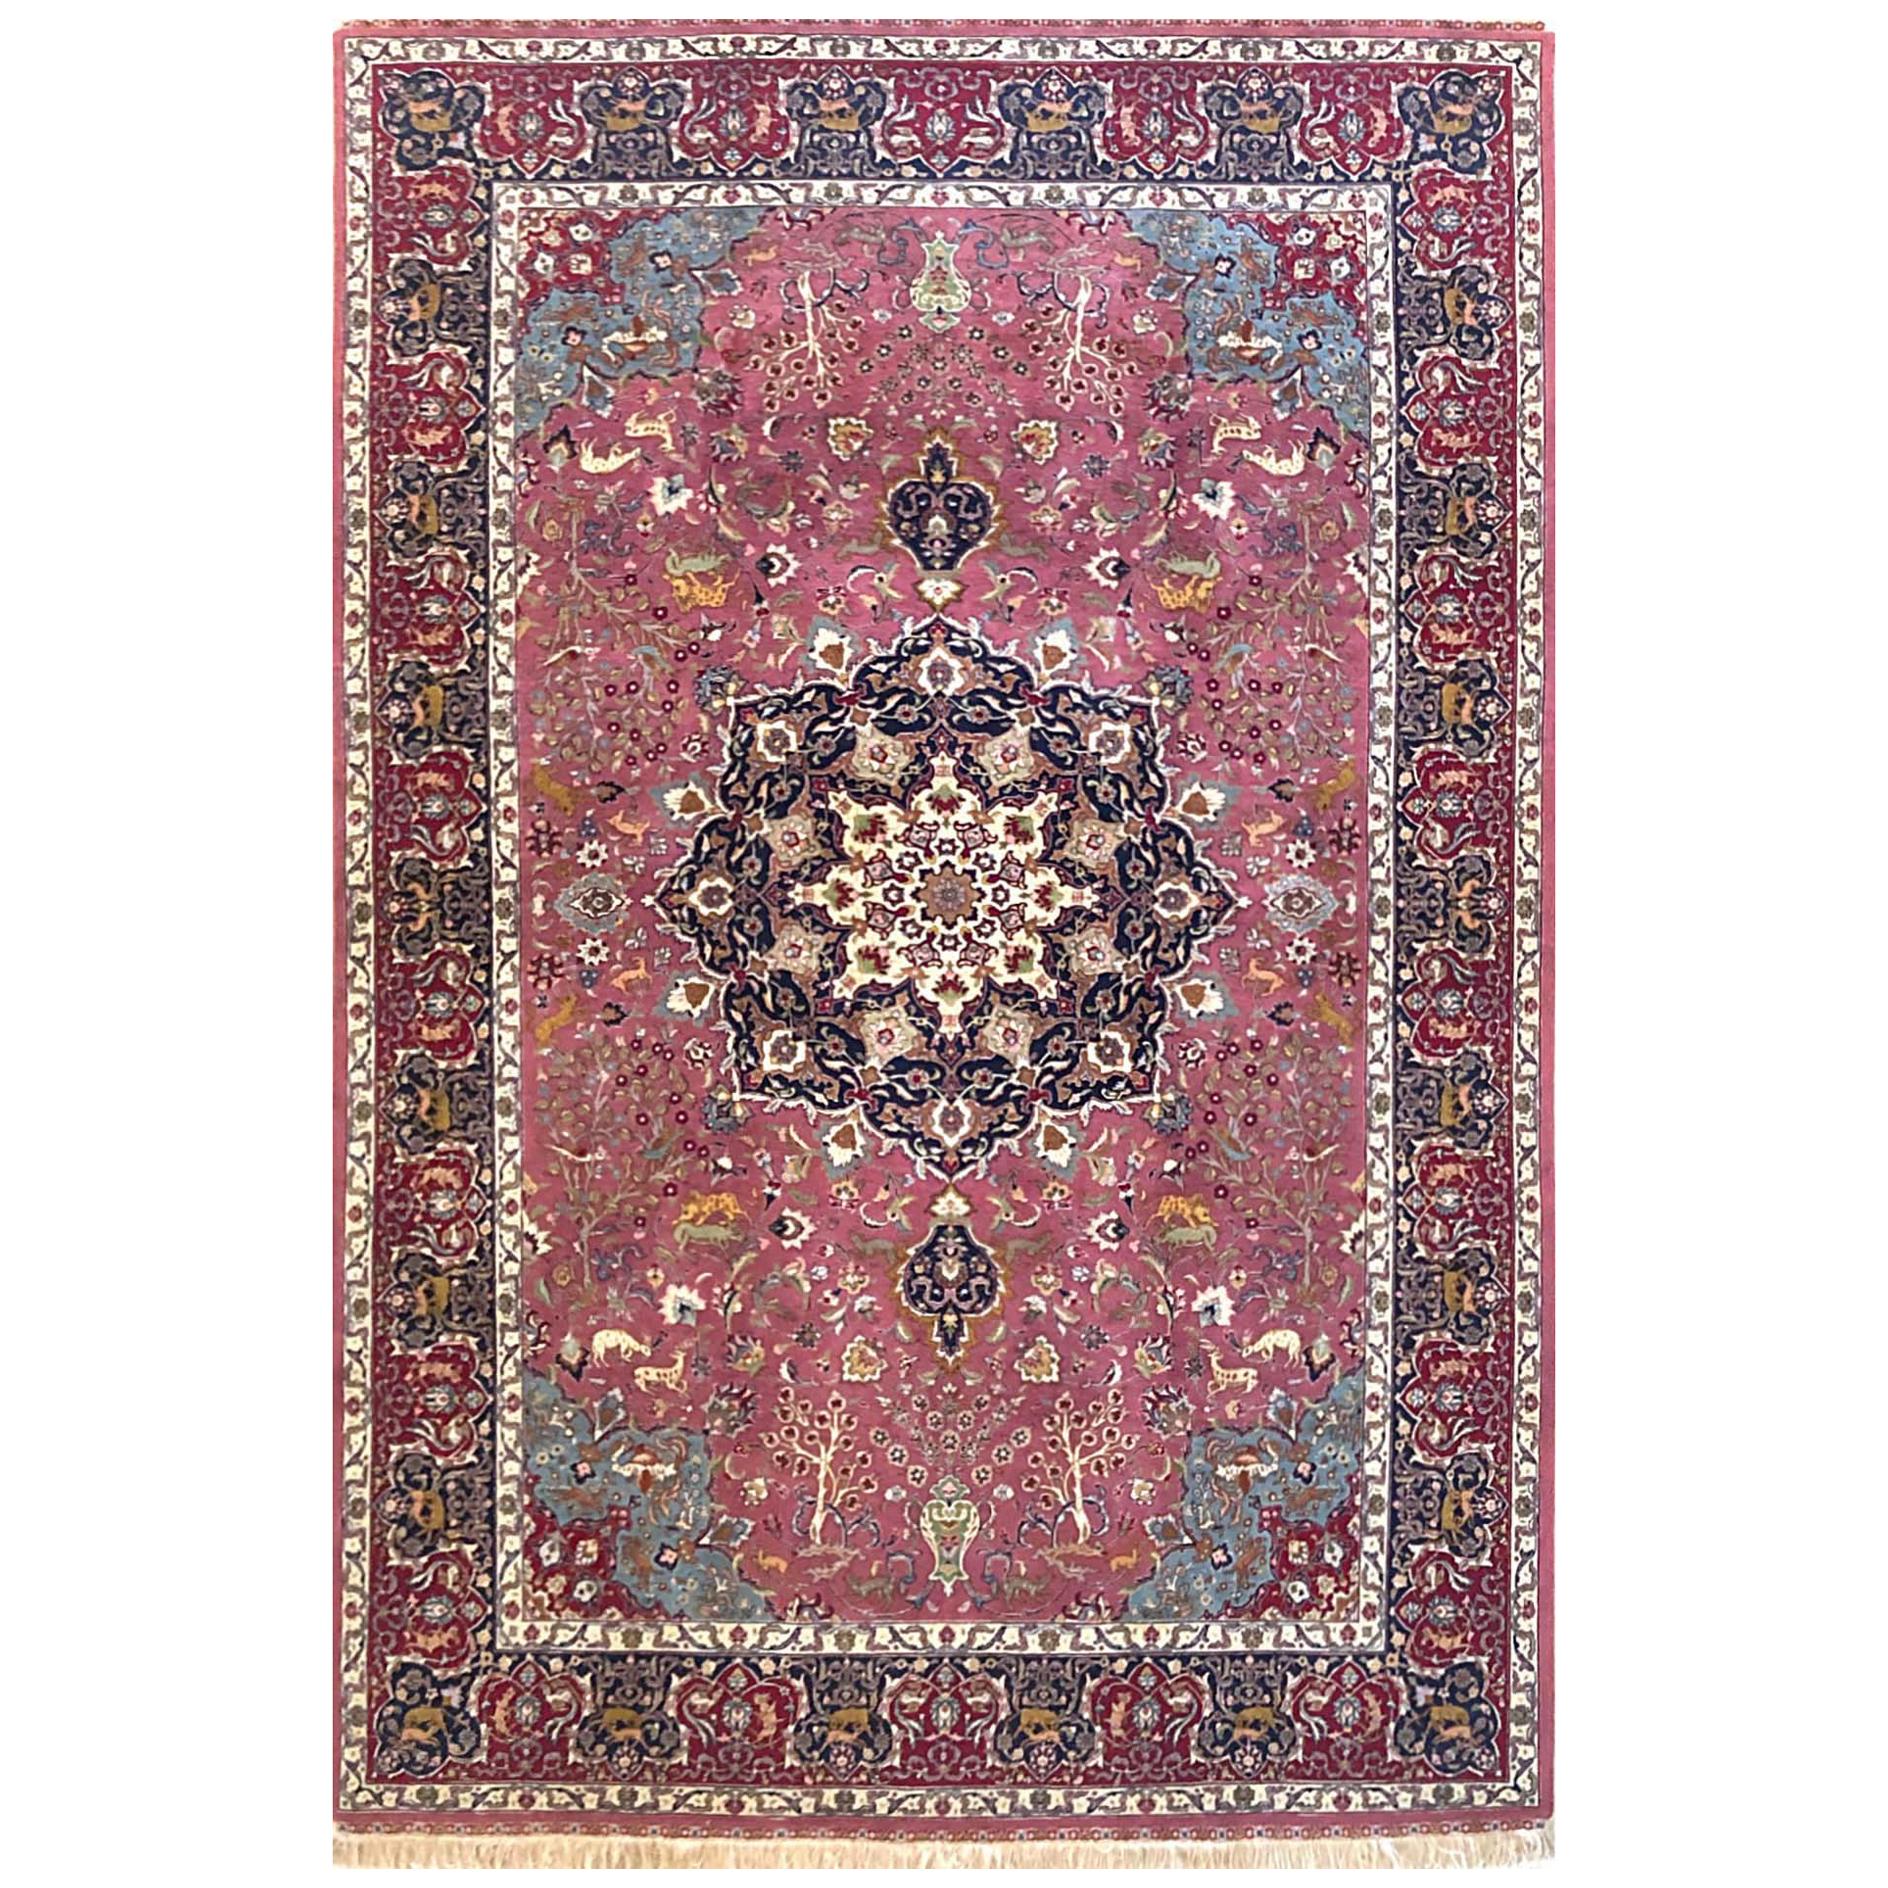 How can I tell if a Persian rug is authentic?